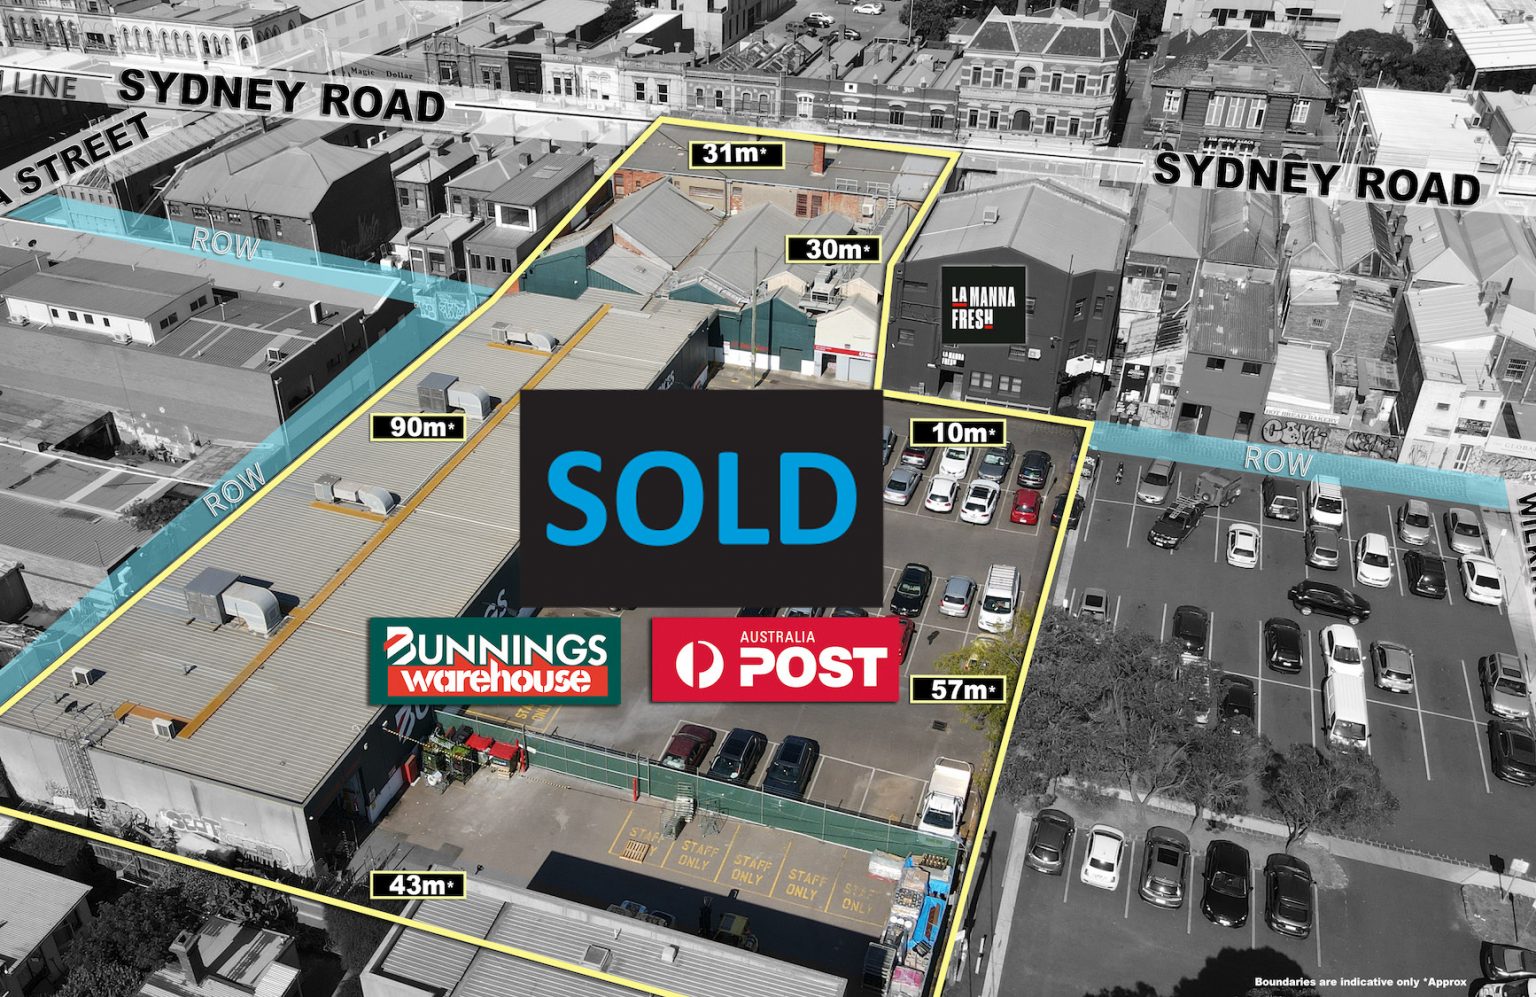 Brunswick Bunnings and Australia Post site sold in just 4 days